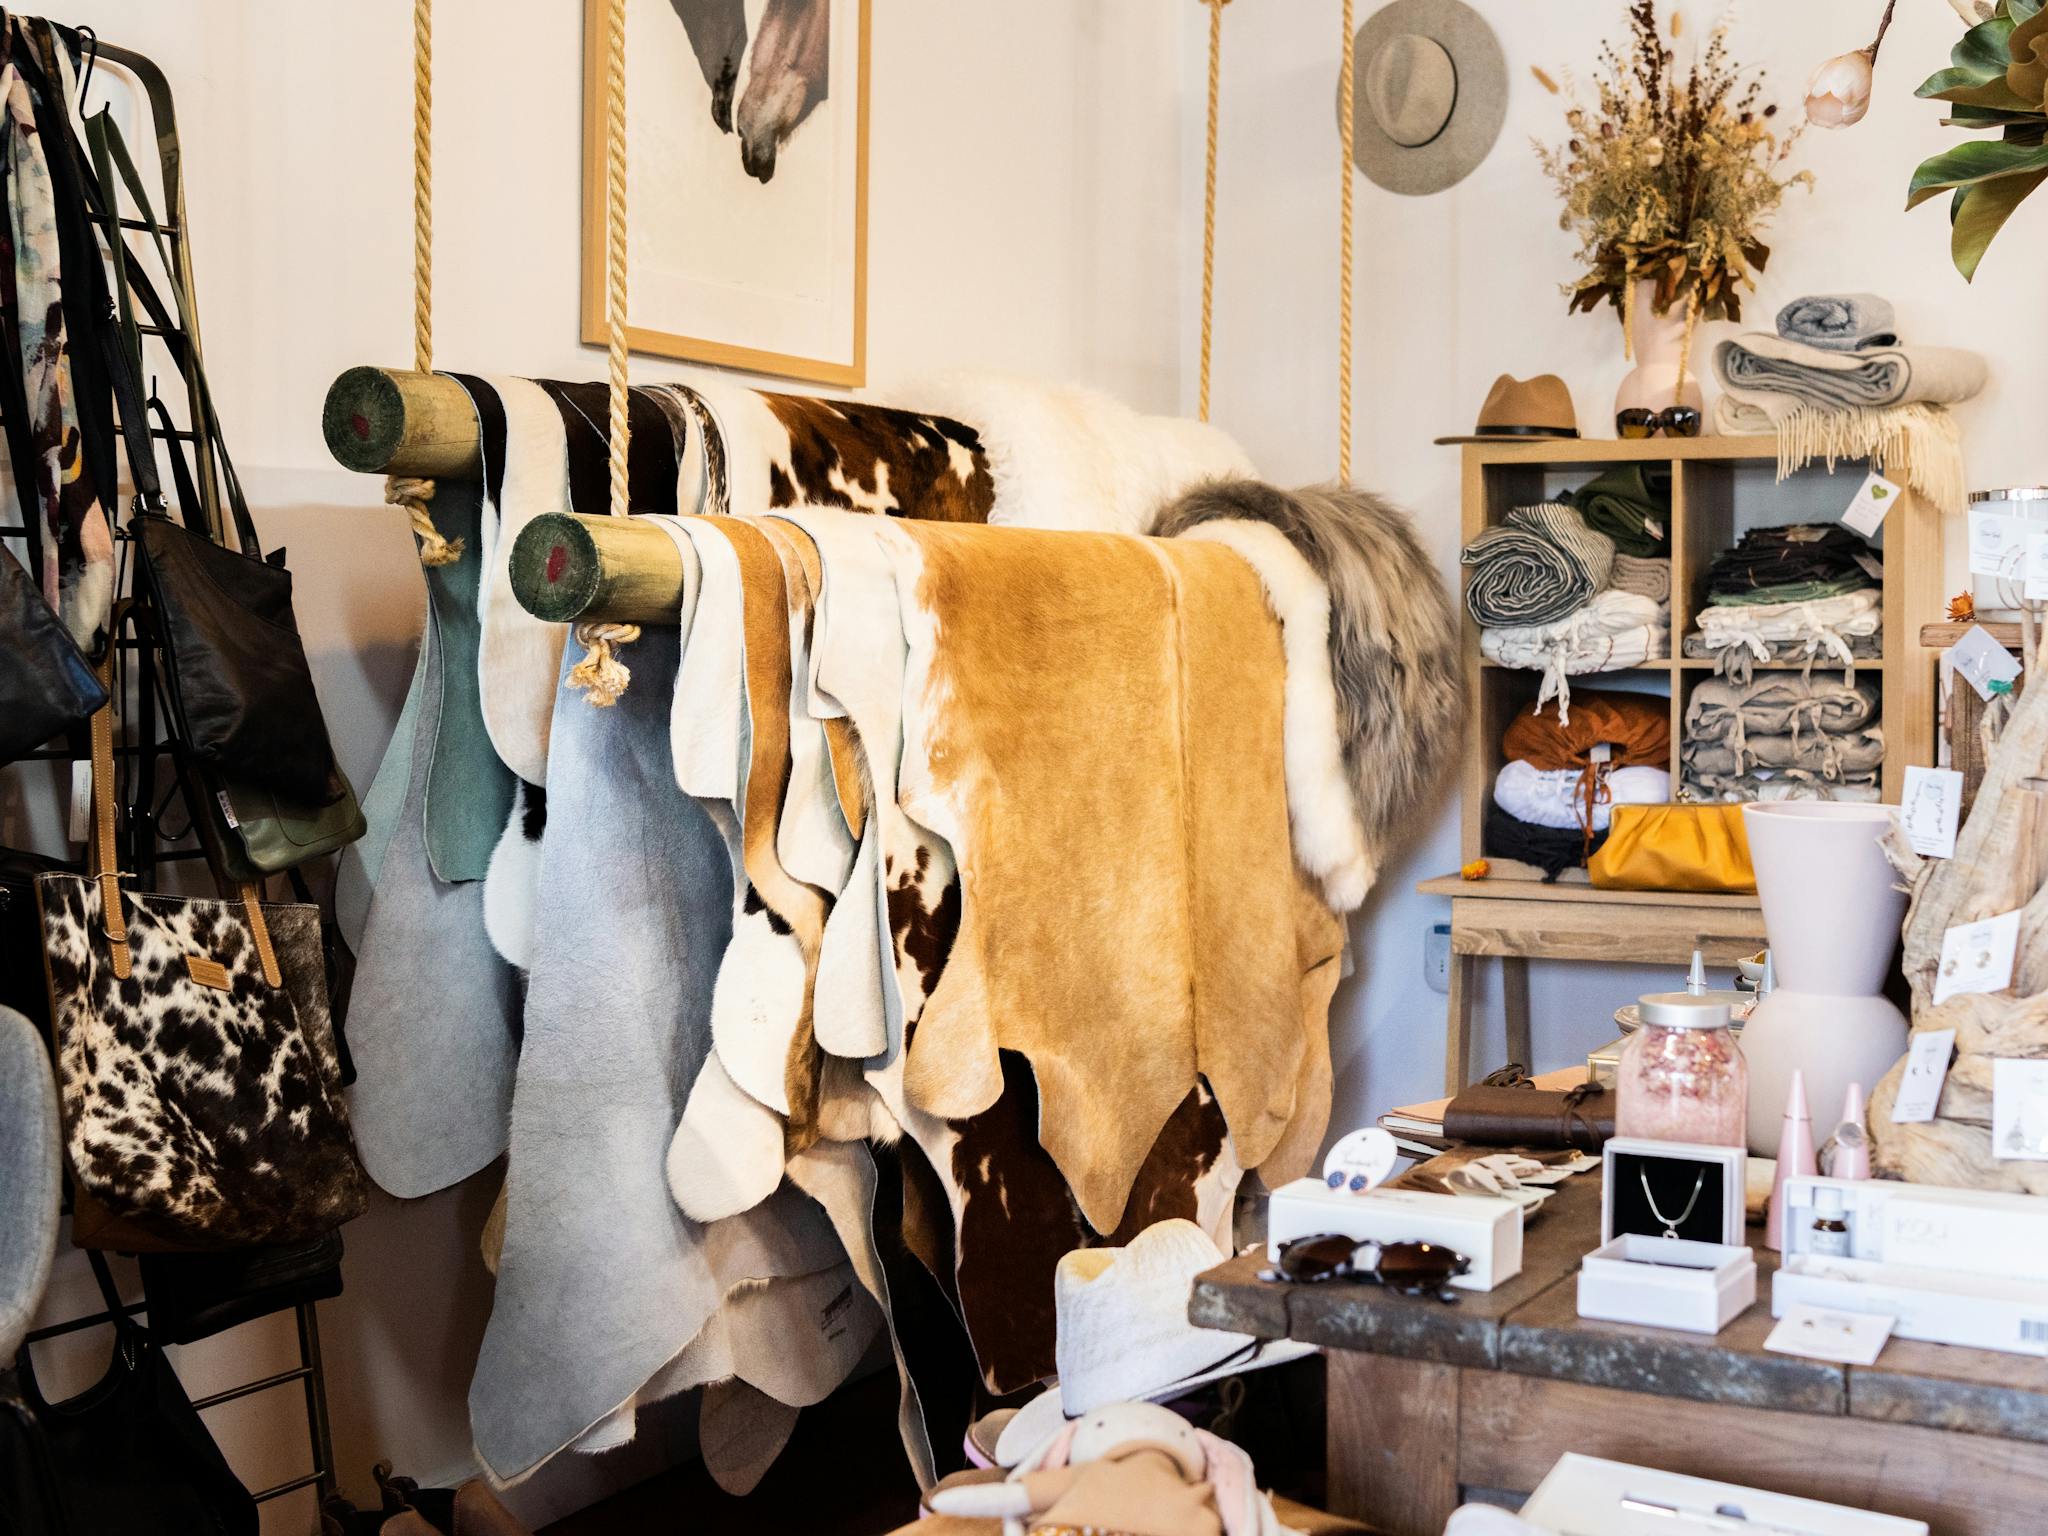 Cowhides and sheepskins hanging on timber poles suspended by rope, a cupboard of bed and table linen